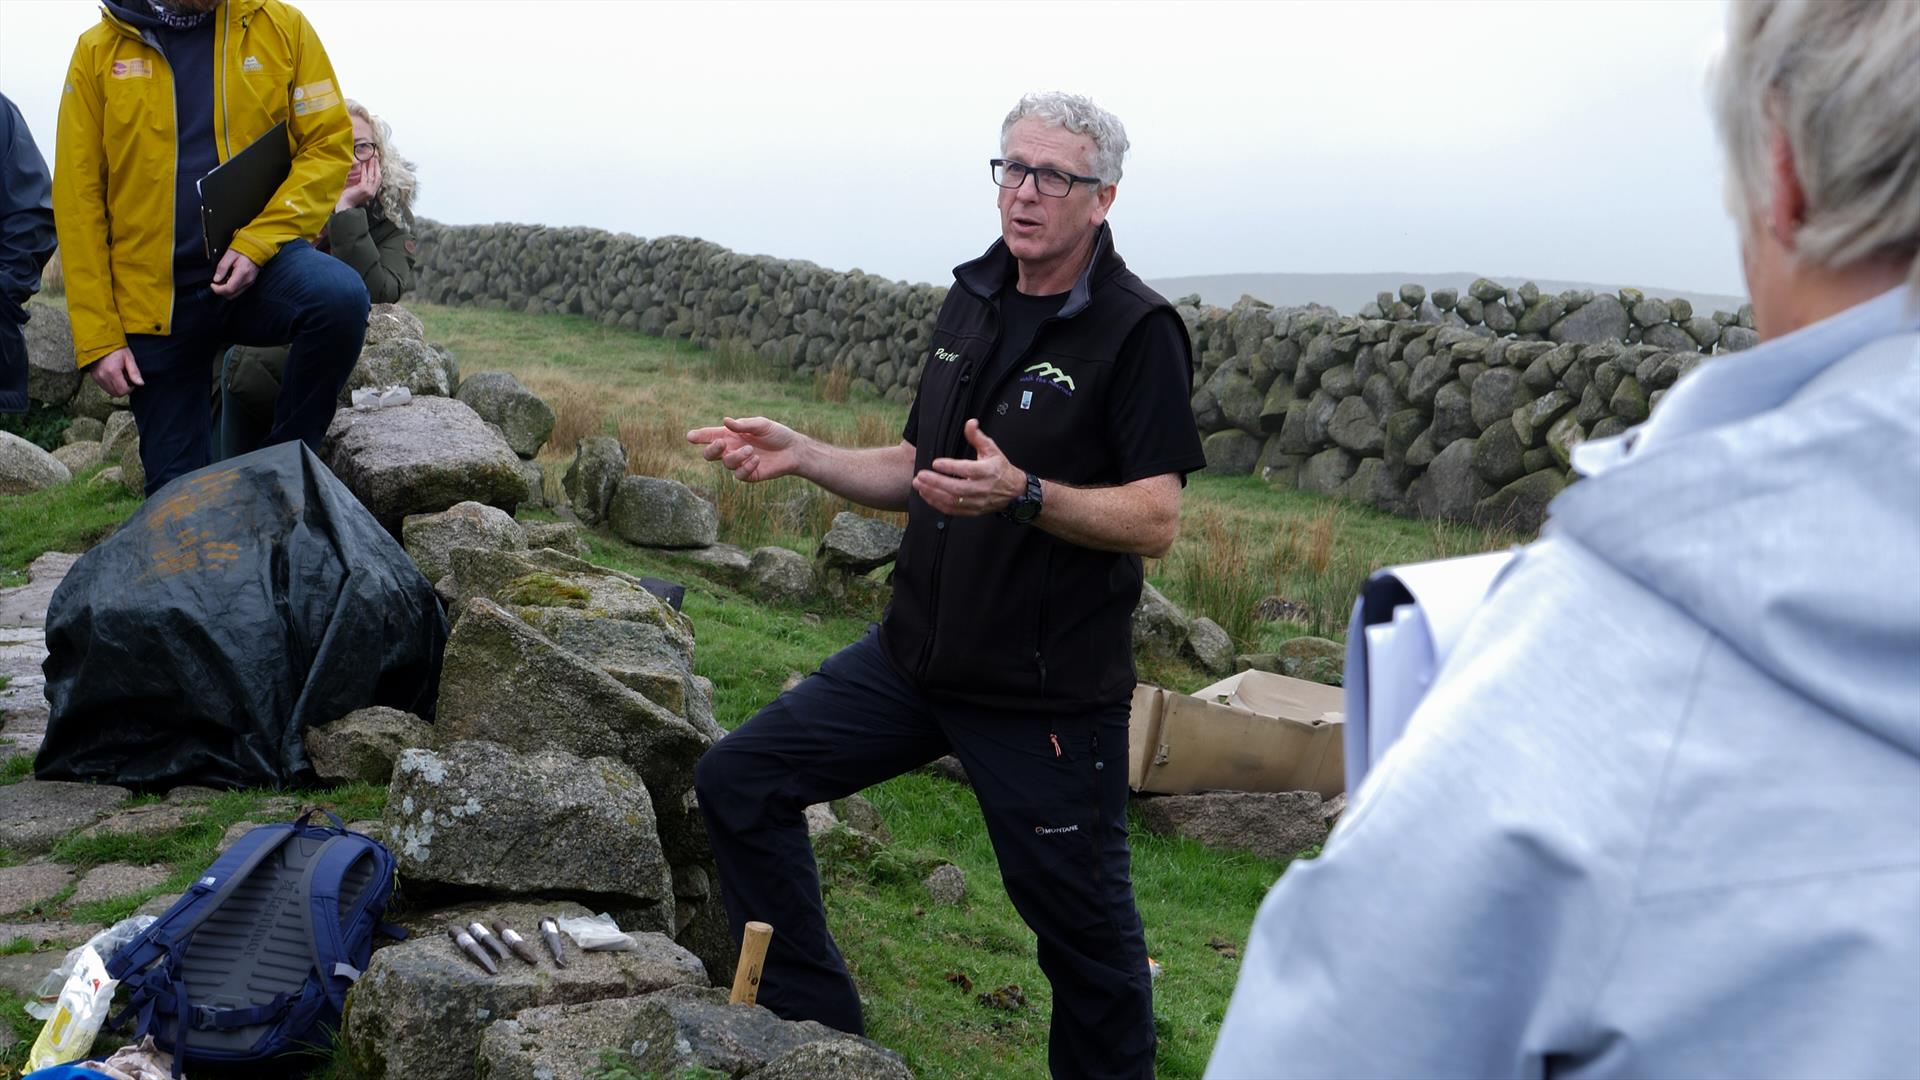 Stone Masons of Mourne Experience - Peter talking to a group of walkers by stone wall